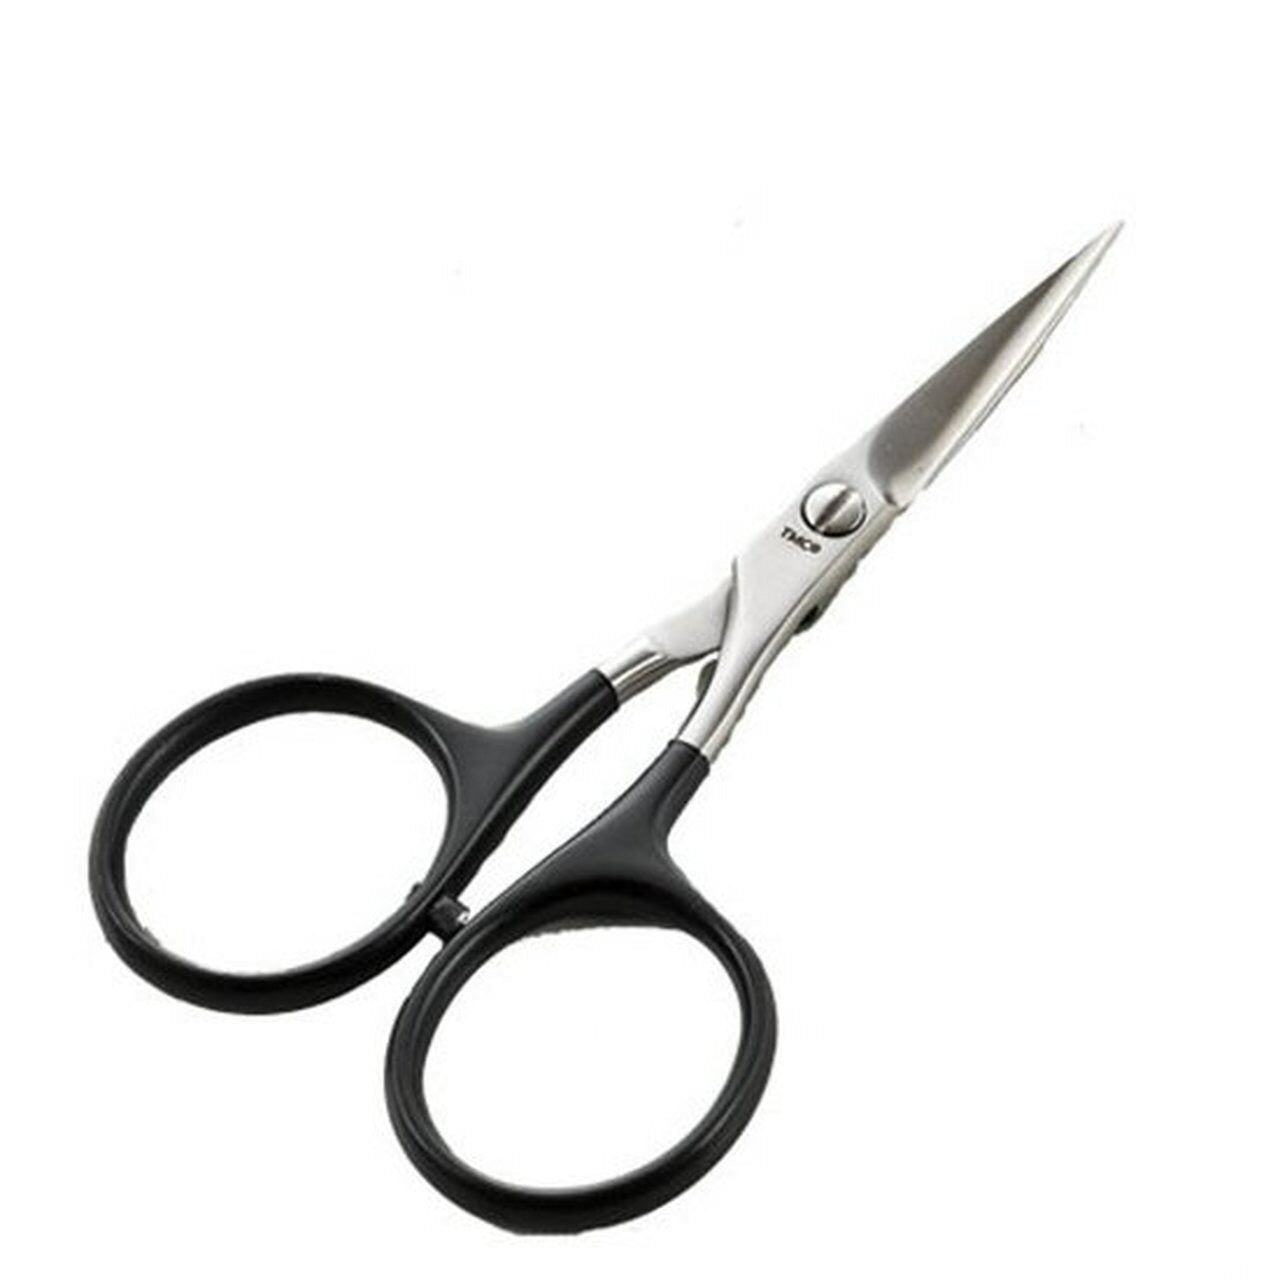 HEMICO Electric Scissors for Cutting Fabric at Rs 235/piece